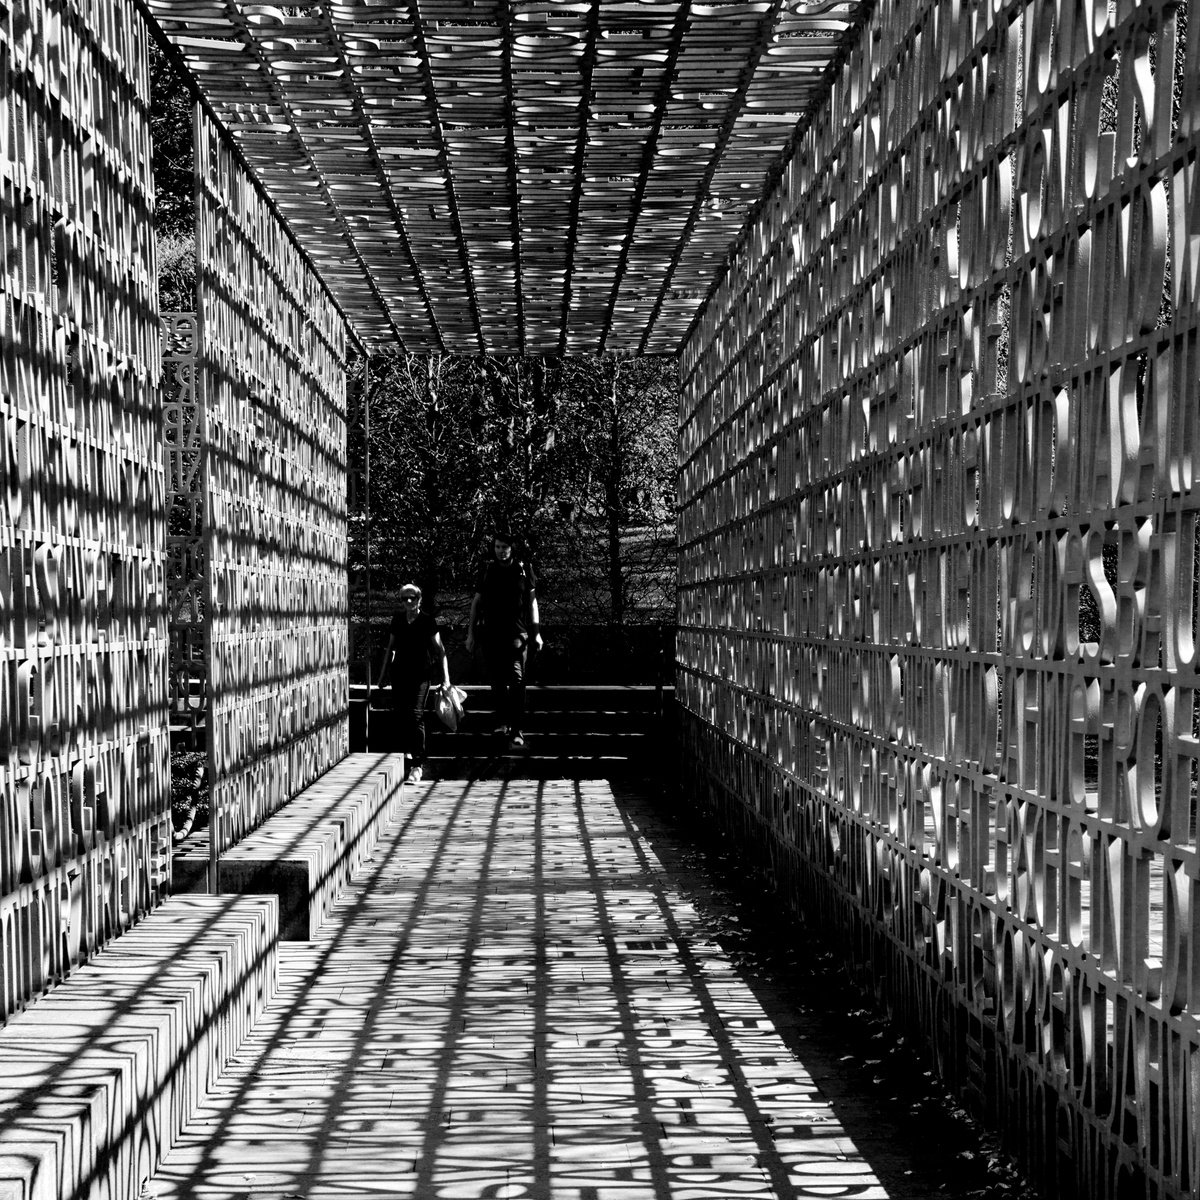 Tunnel of letters by Chiara Vignudelli